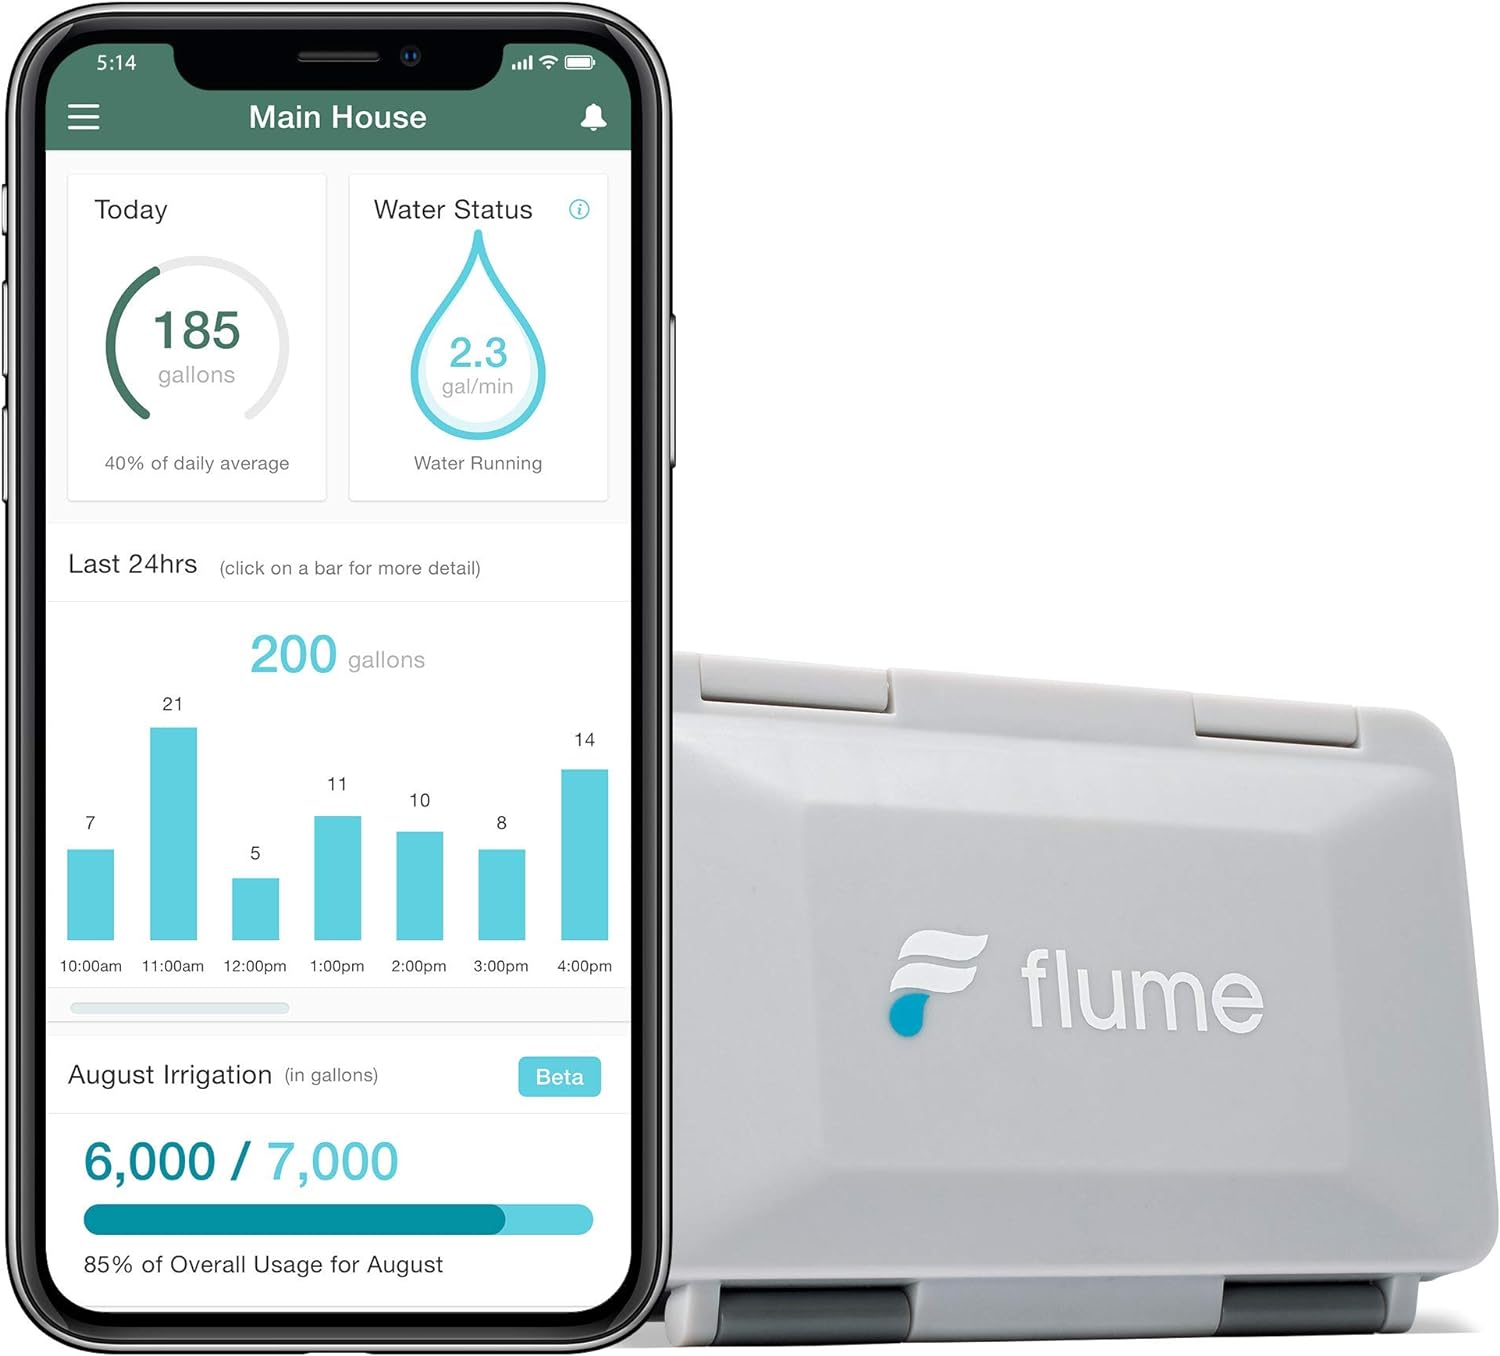 Limited-time deal: Flume 2 Smart Home Water Monitor & Water Leak Detector: Detect Water Leaks Before They Cause Damage. Monitor Your Water Use to Reduce Waste & Save Mone - $199